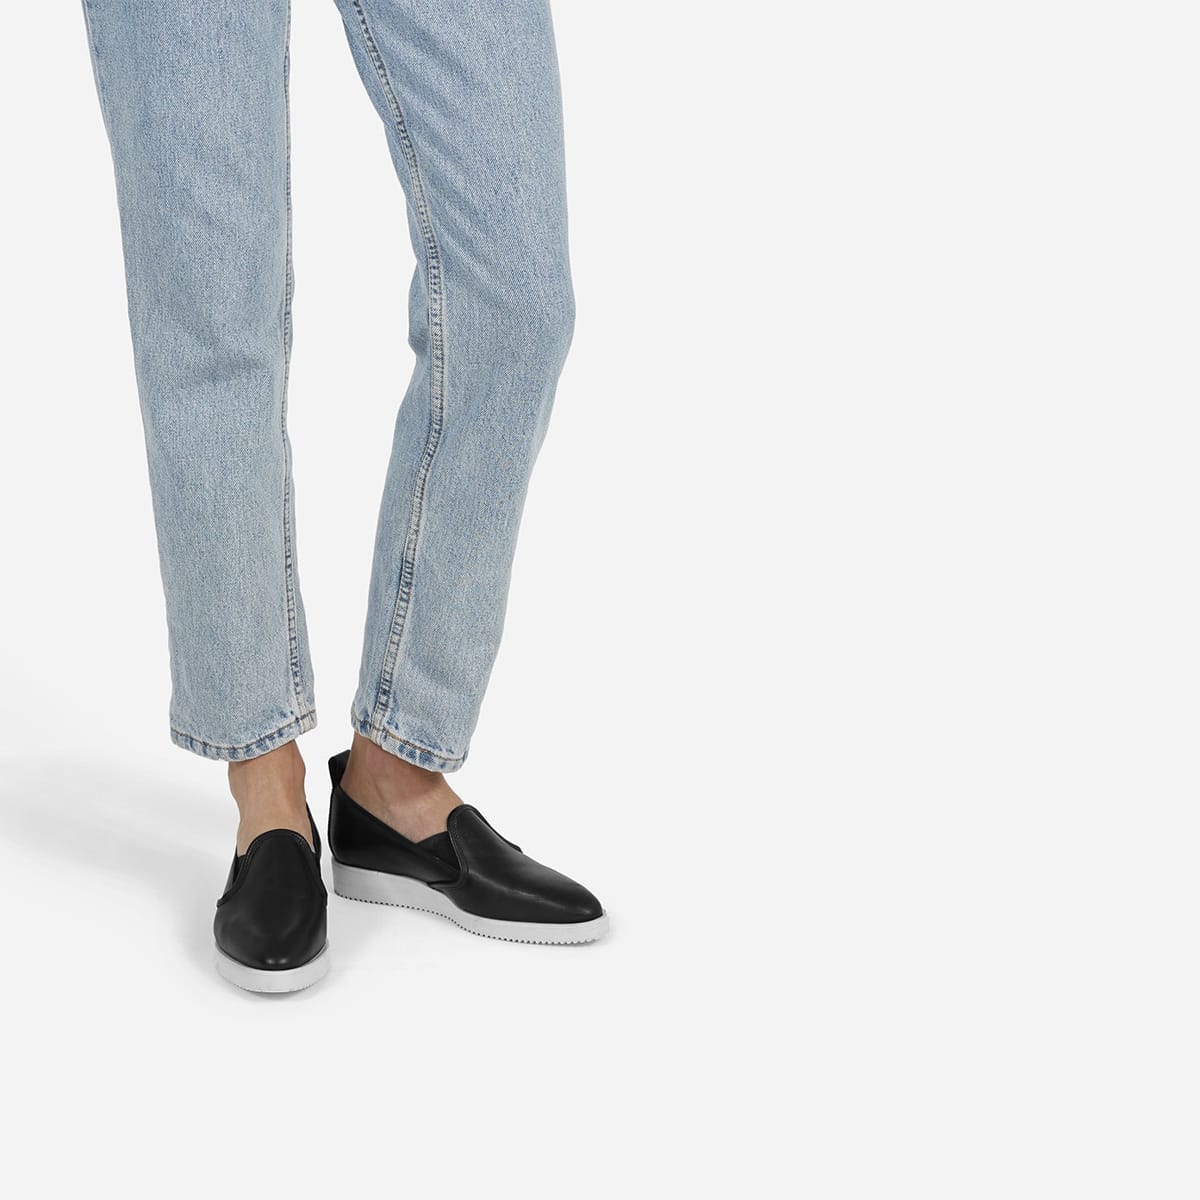 everlane italy shoes